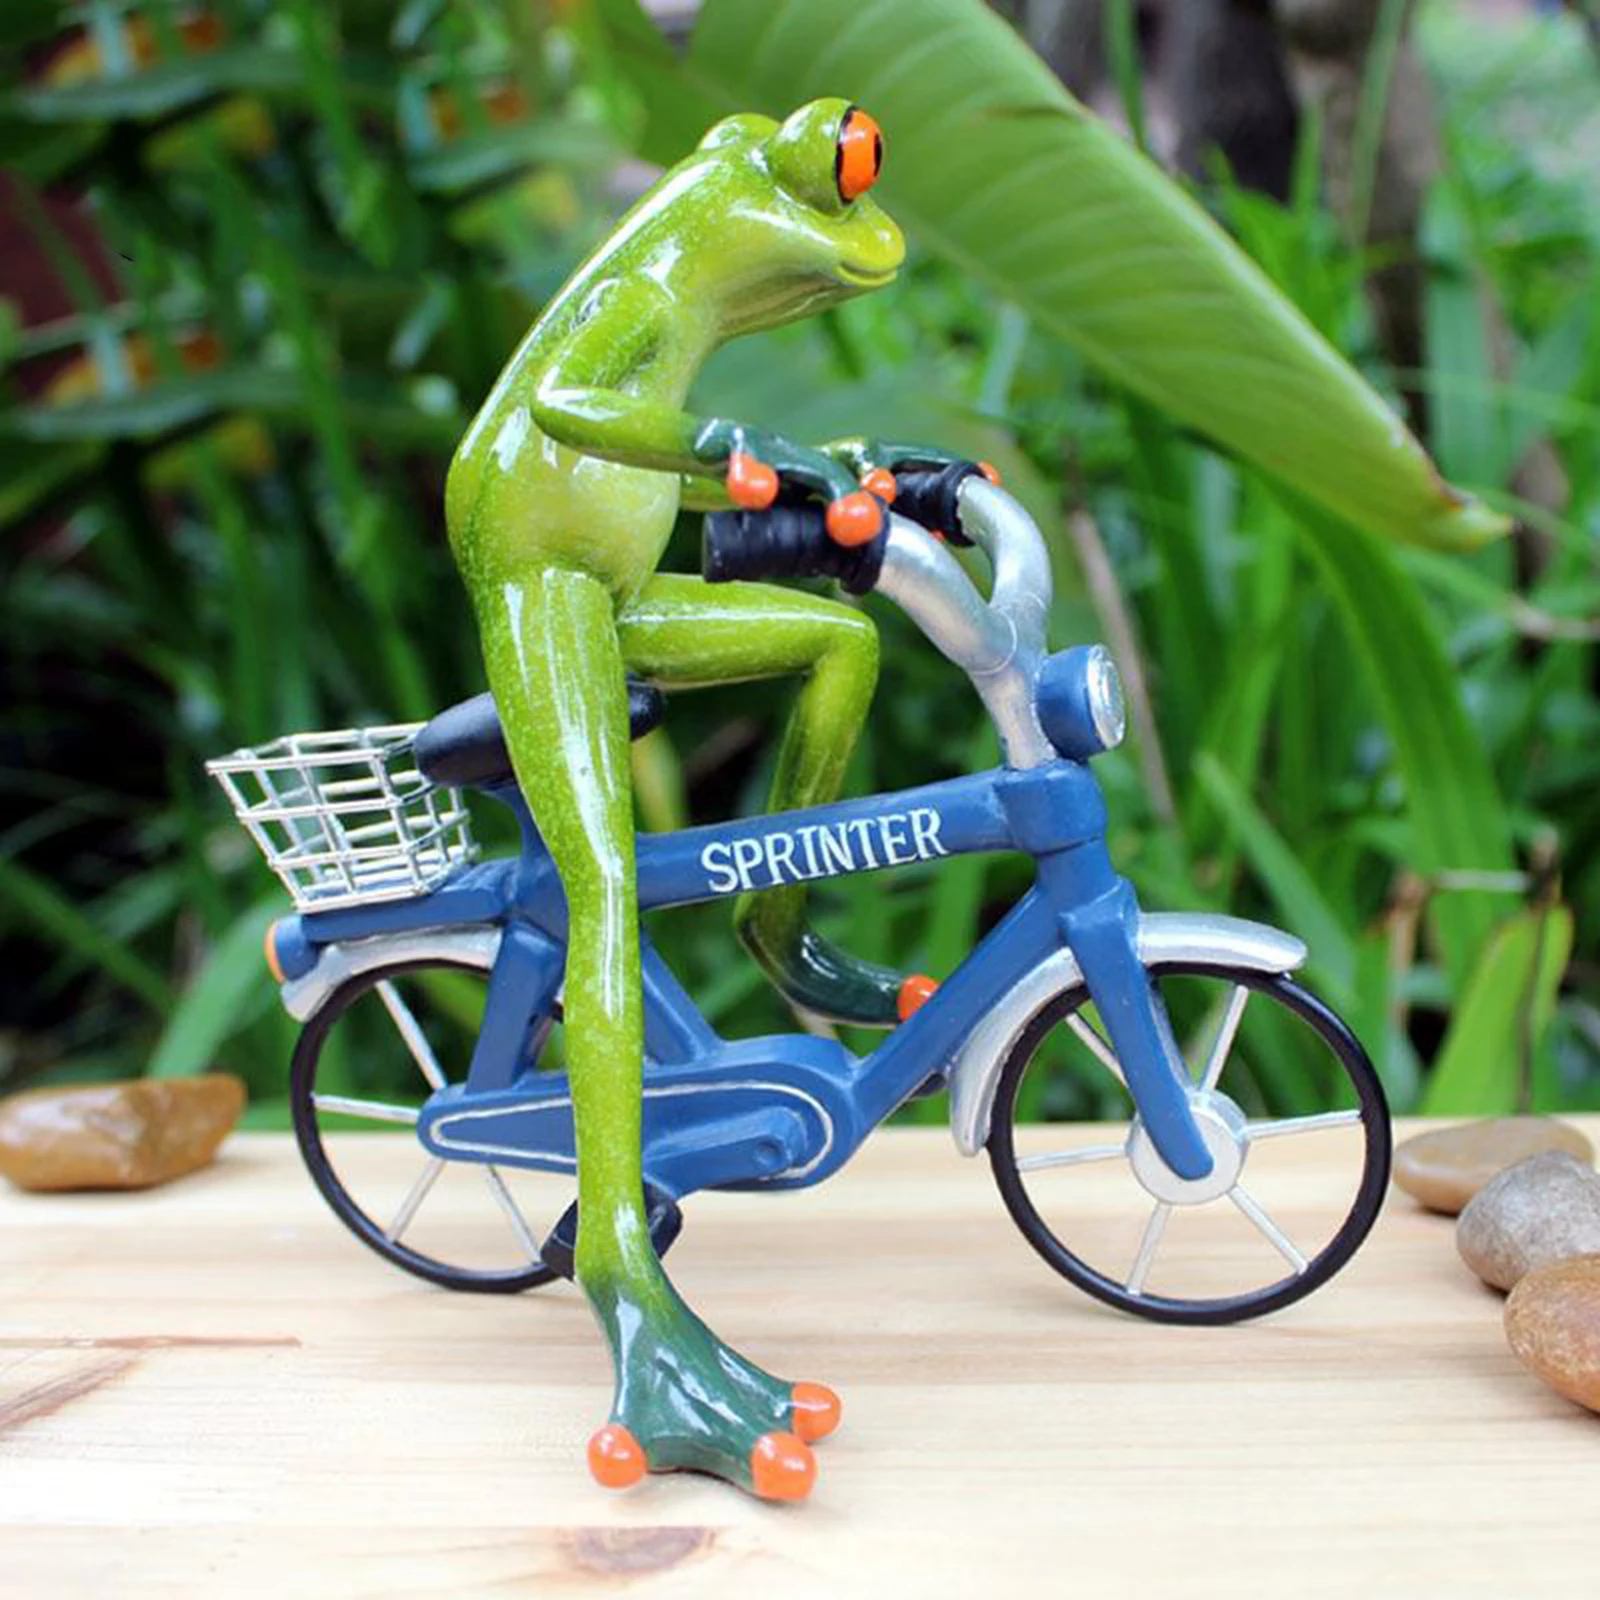 Resin Funny Garden Decorative Sculpture Frog Cycling Figurine Frog Statue for Gift Home Office Desk Decor Ornament